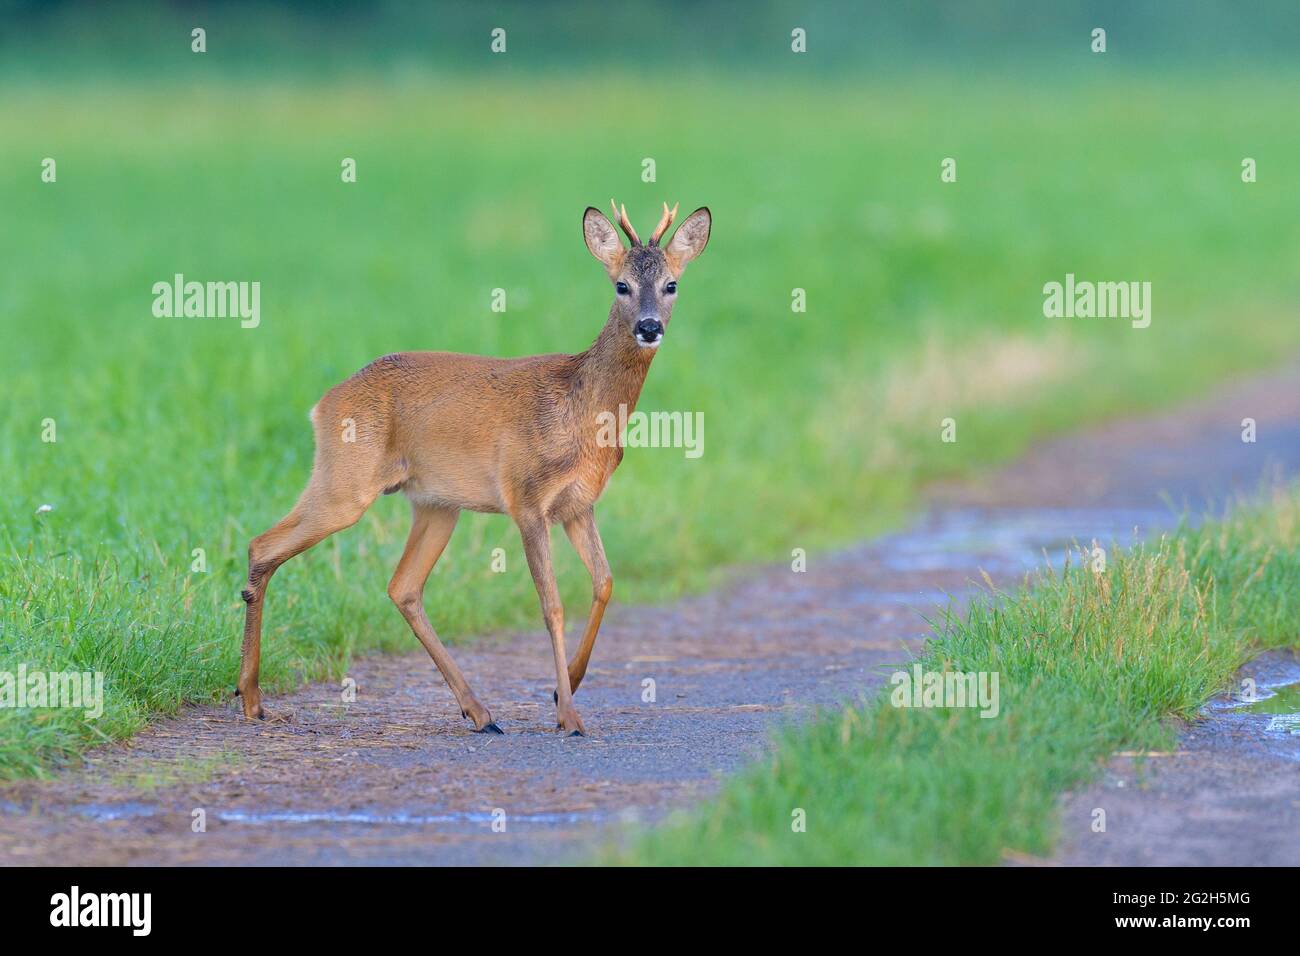 Roebuck (Capreolus capreolus) changes over a dirt road, August, Hesse, Germany Stock Photo